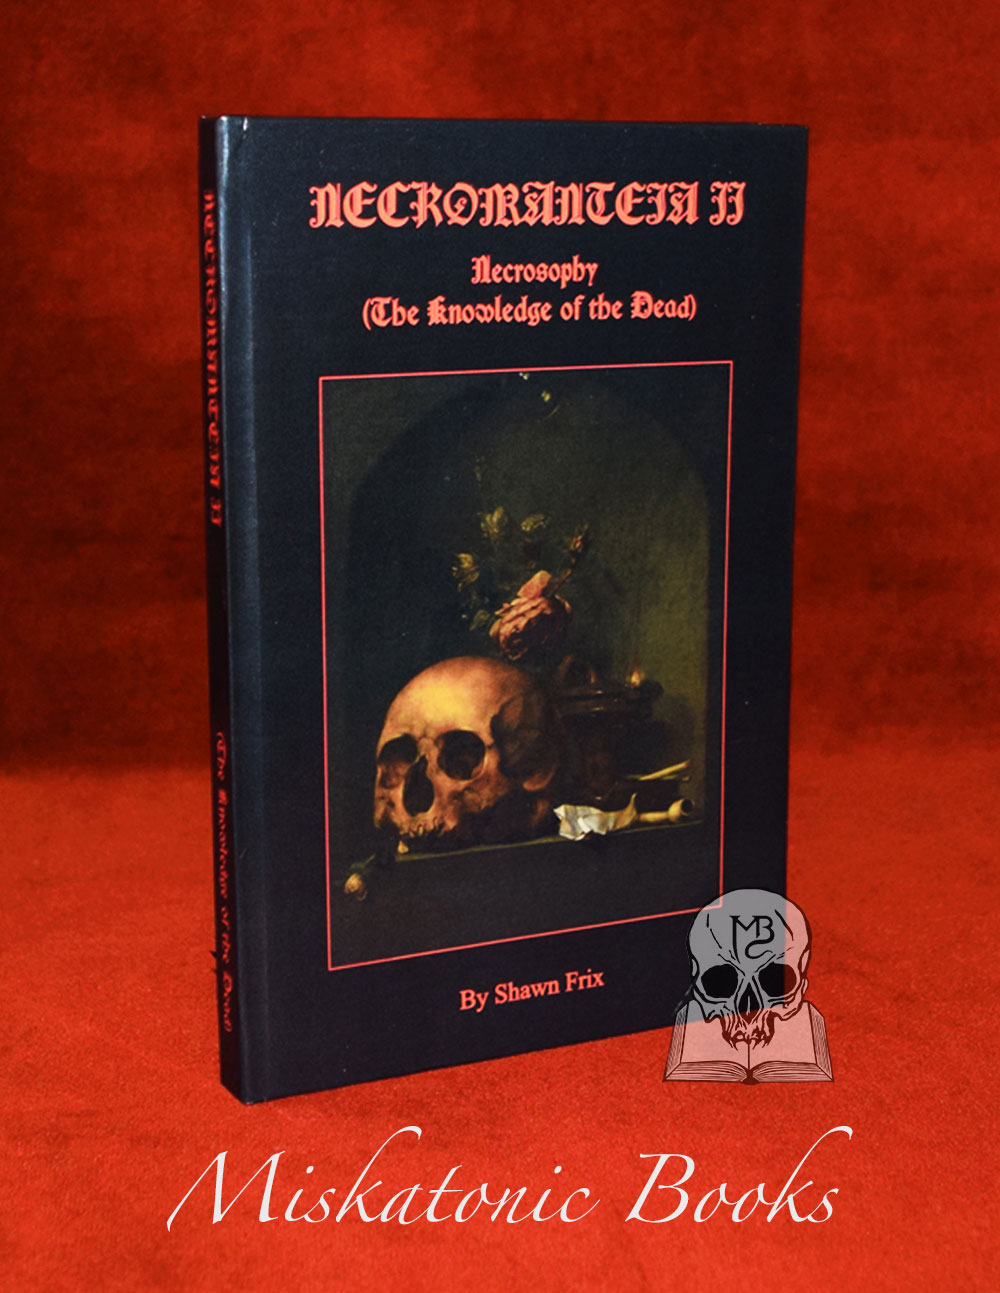 NECROMANTEIA Vol 2 "Necrosophy: Knowledge of the Dead" by Shawn Frix - Limited Edition Hardcover with Altar Cloth